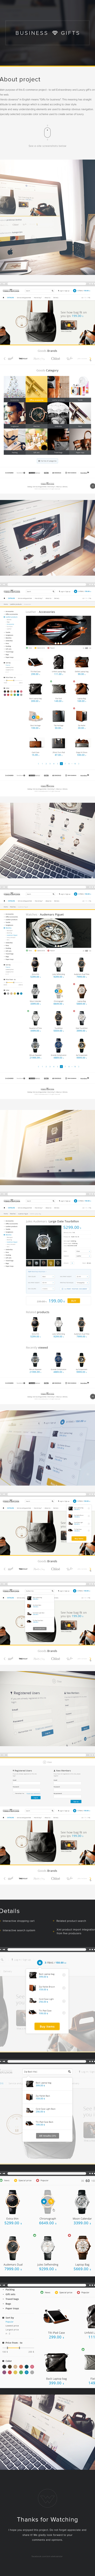 Web design clean minimal Ecommerce shop eshop yellow products gifts corporate visual design store 3D business